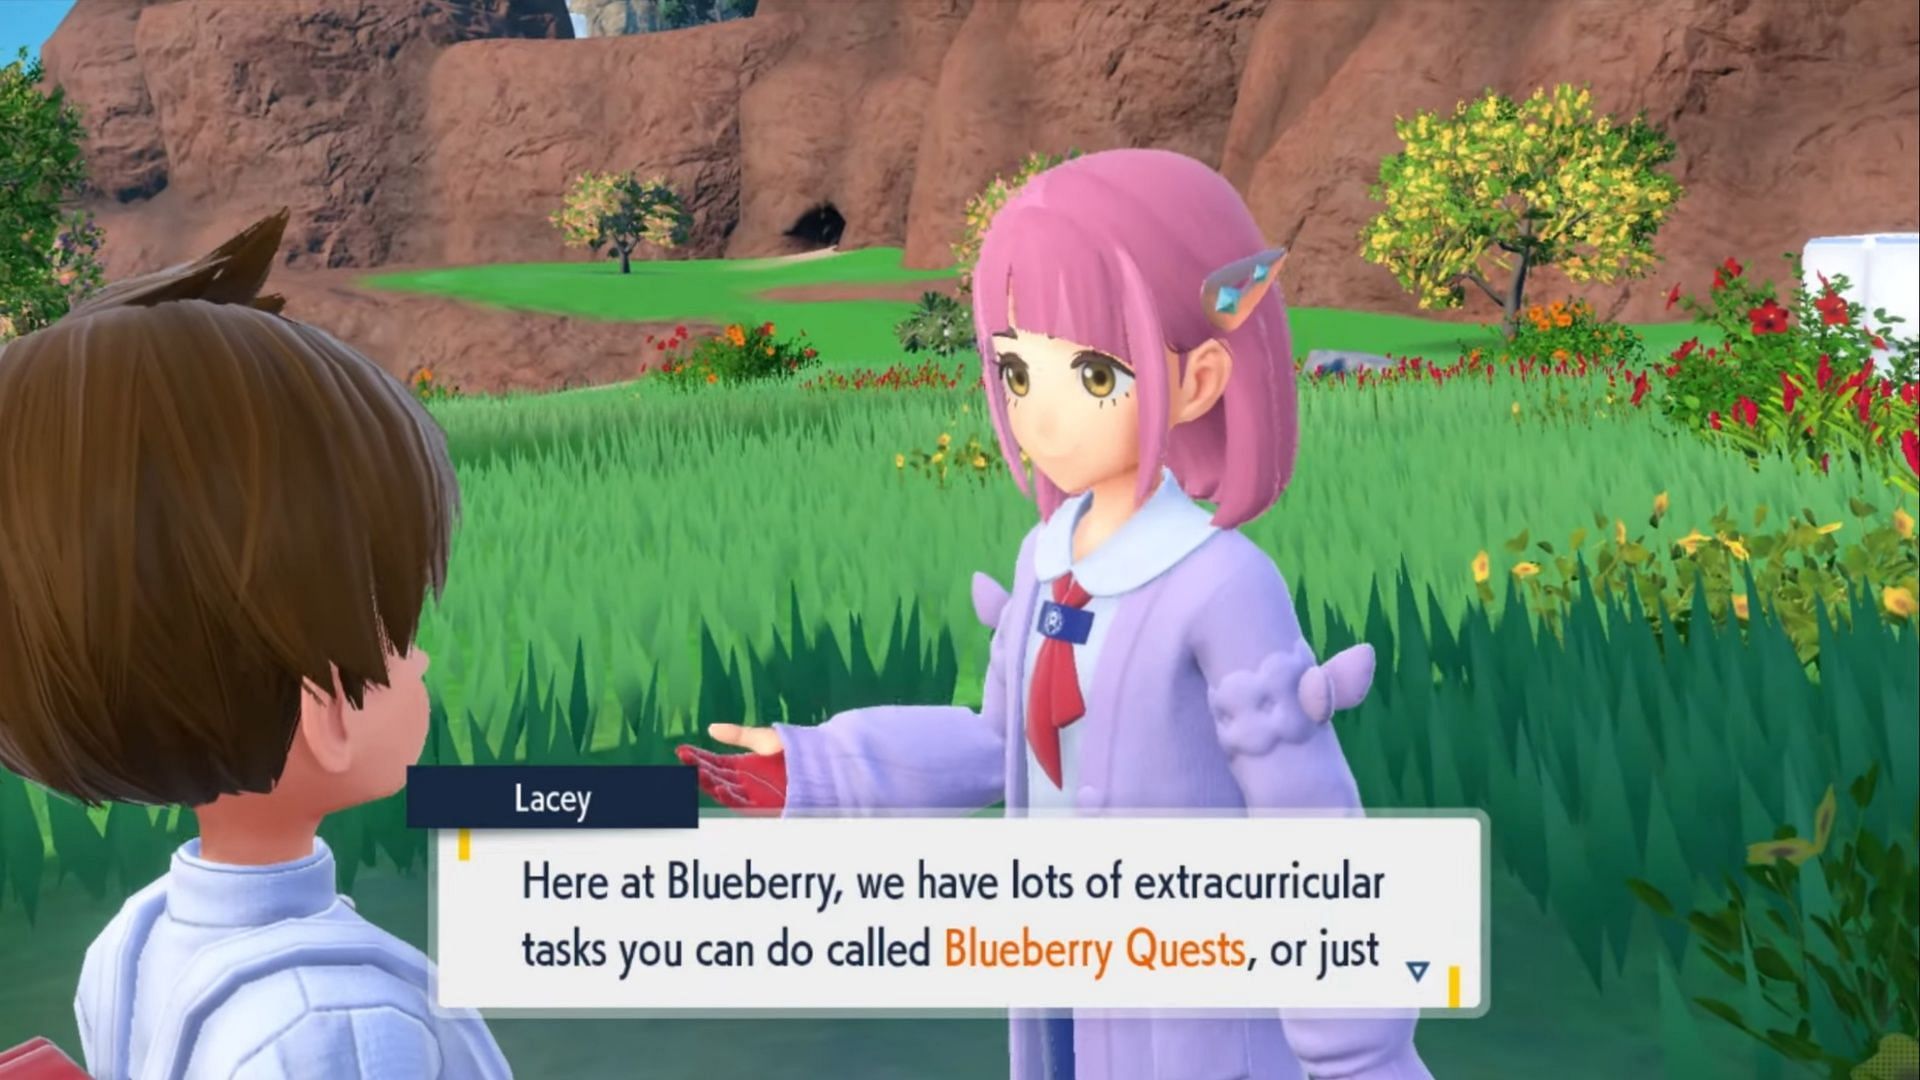 Pokemon Scarlet and Violet Indigo Disk Blueberry Quests explained (Image via The Pokemon Company)